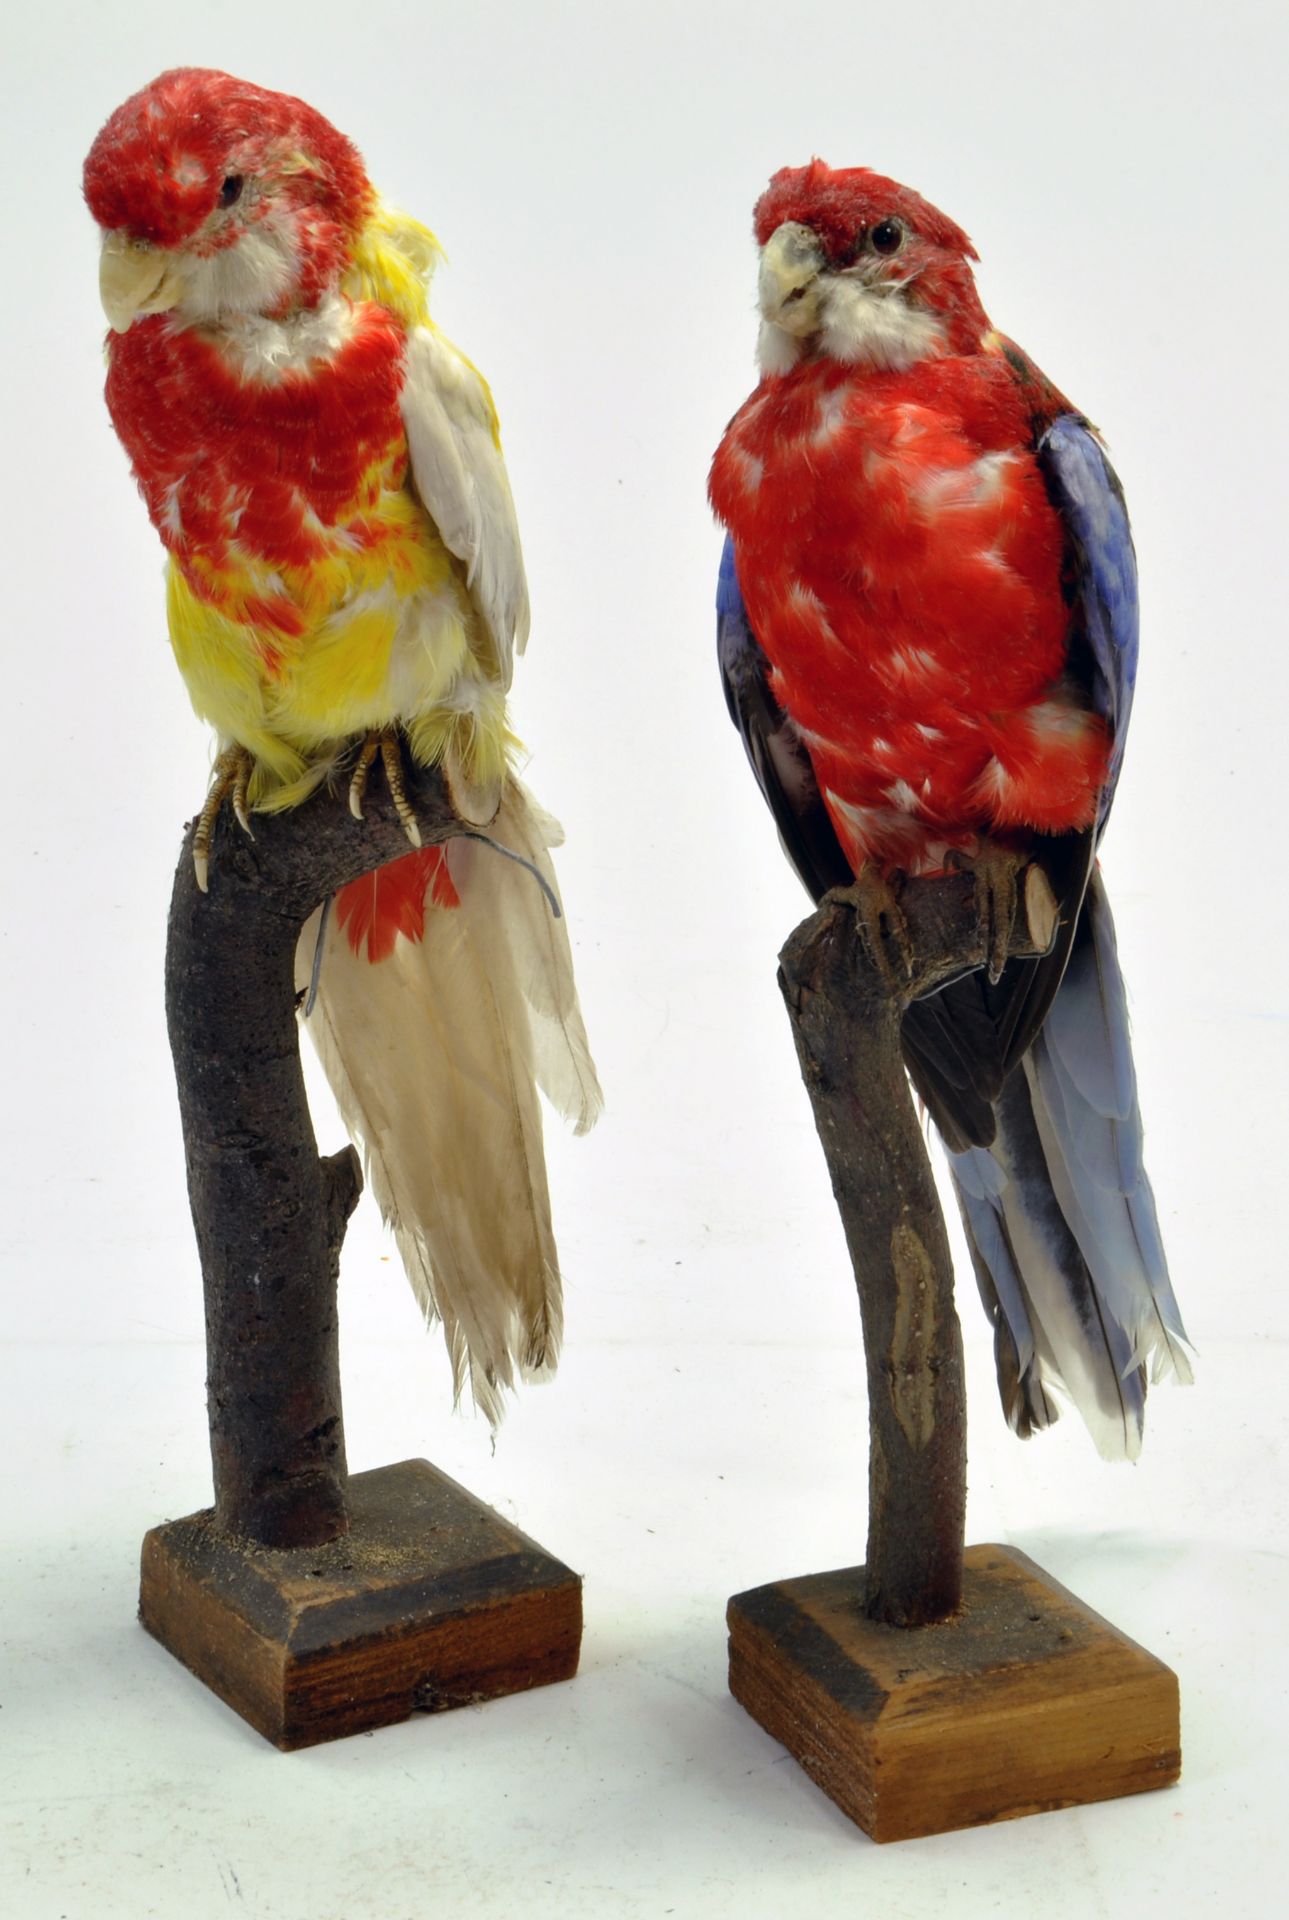 Taxidermy: An example of two (domestic) exotic birds mounted on a plinth.